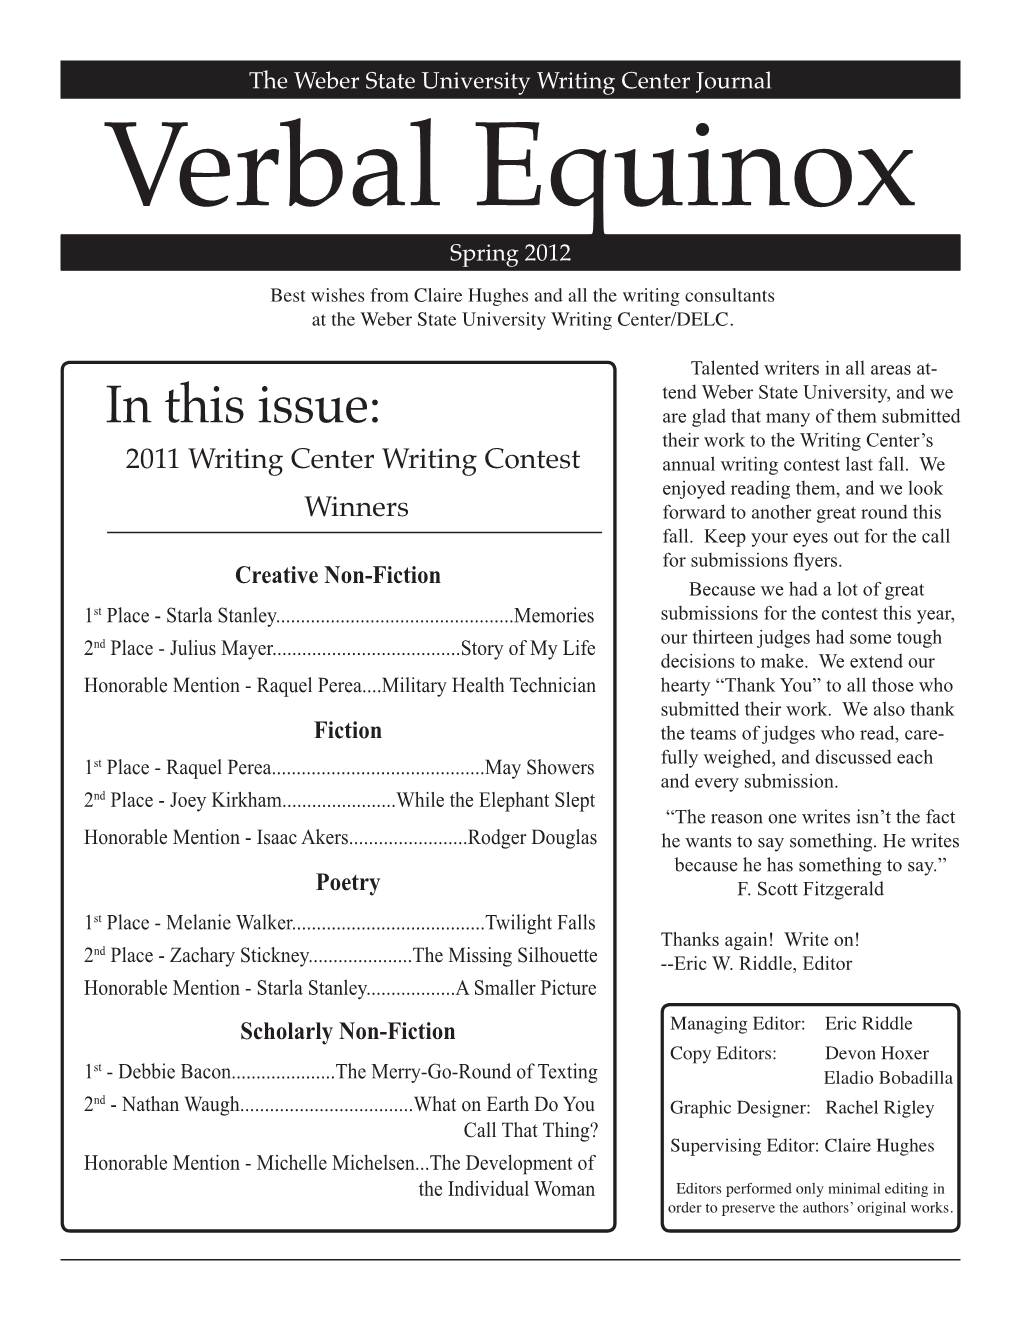 Verbal Equinox Spring 2012 Best Wishes from Claire Hughes and All the Writing Consultants at the Weber State University Writing Center/DELC